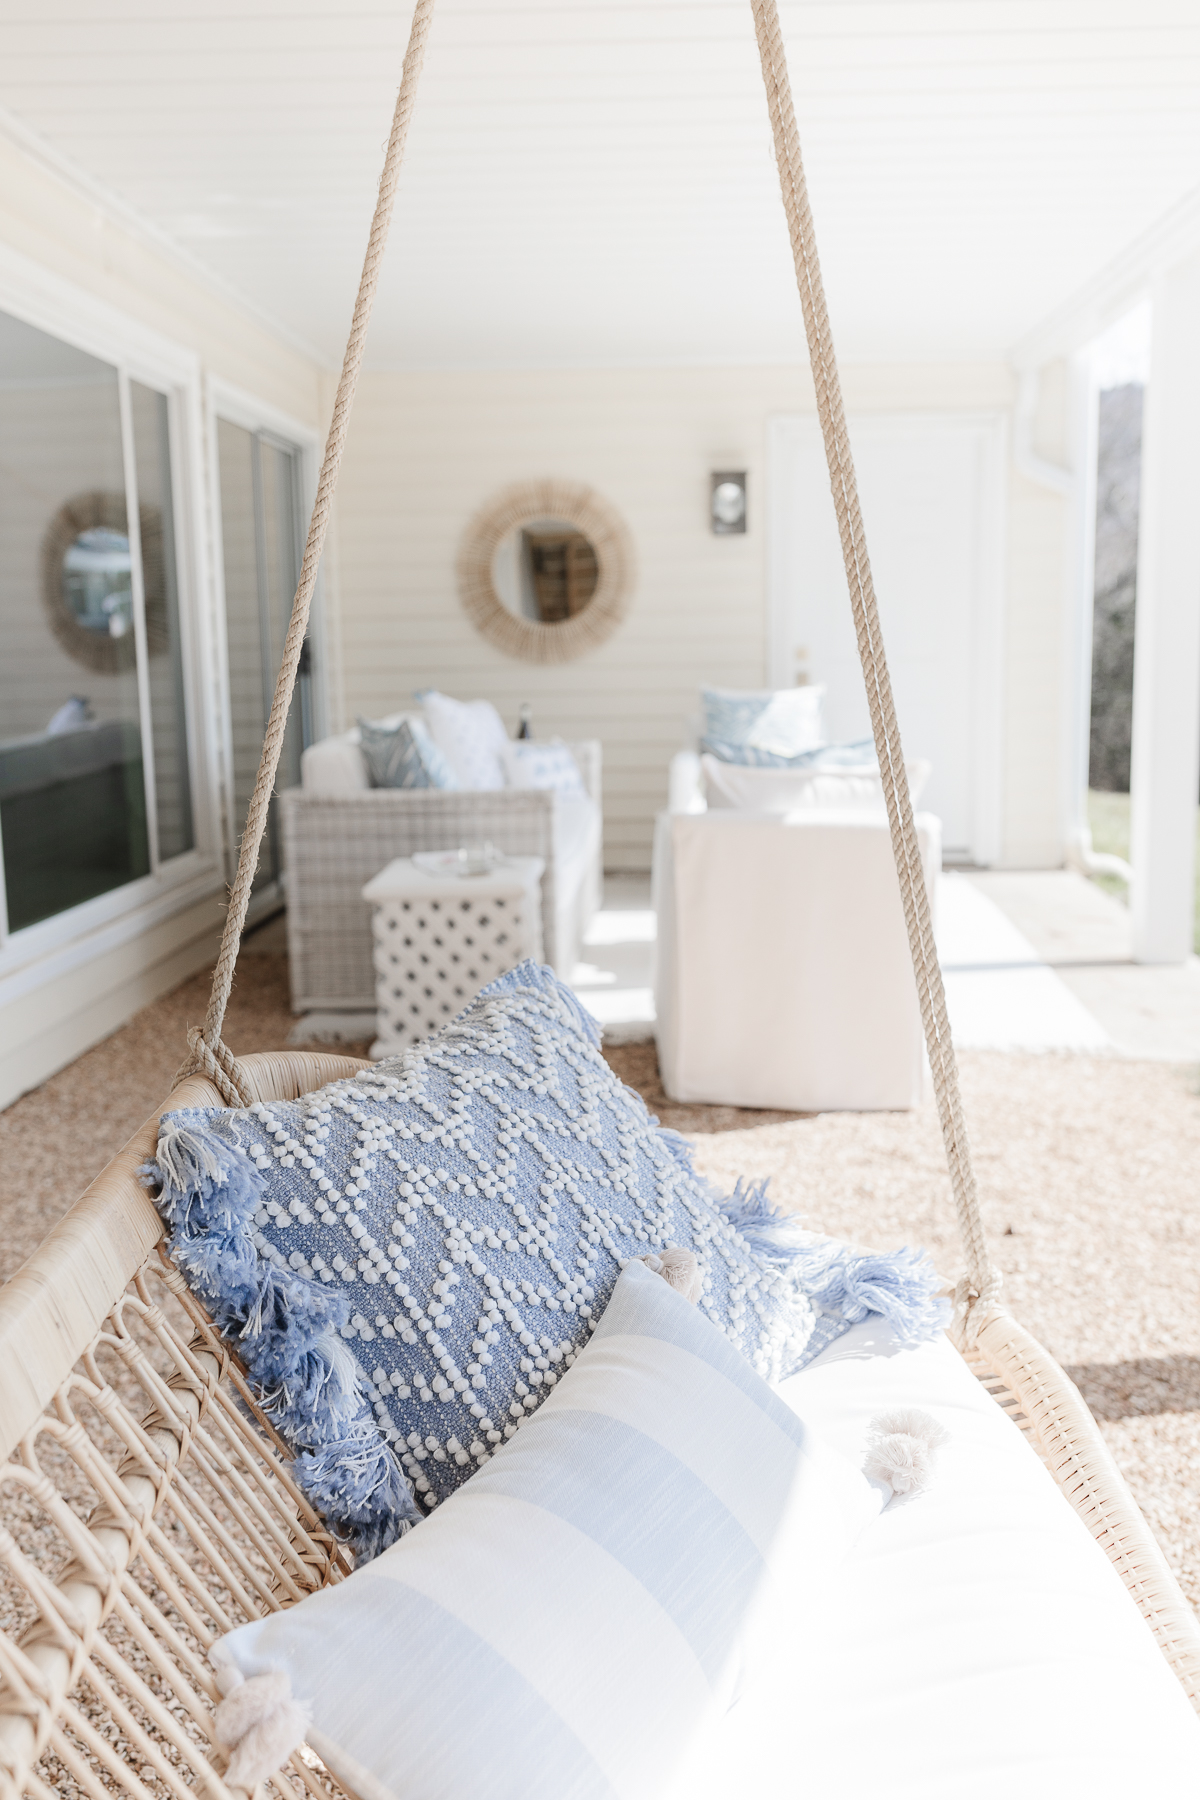 An outdoor patio area with a hanging chair and outdoor pillows in blue and white. 